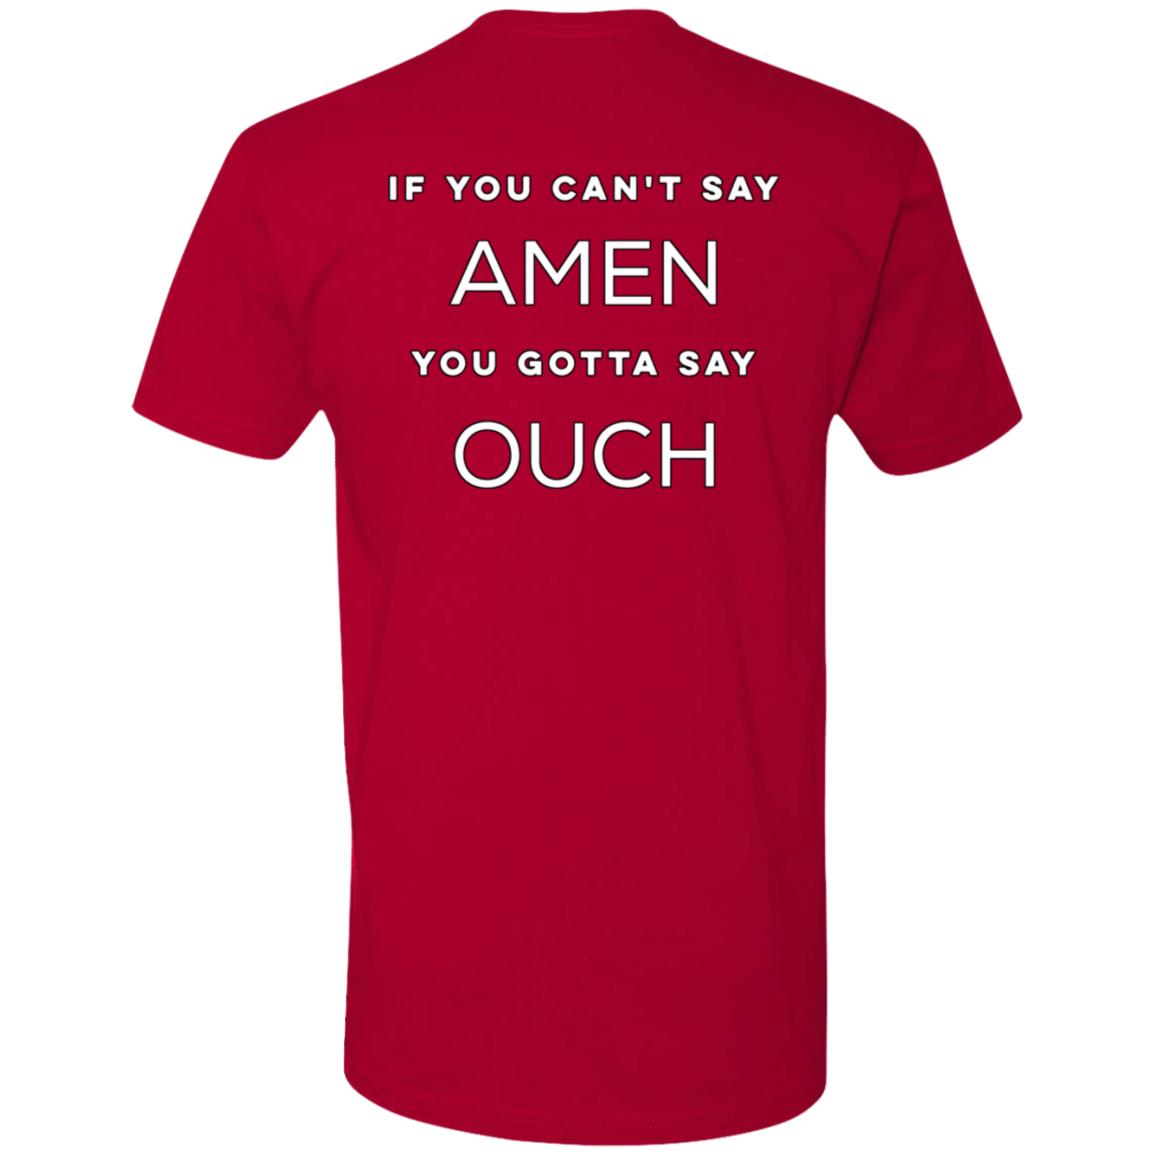 If You Can't Say Amen (Unisex Tee)